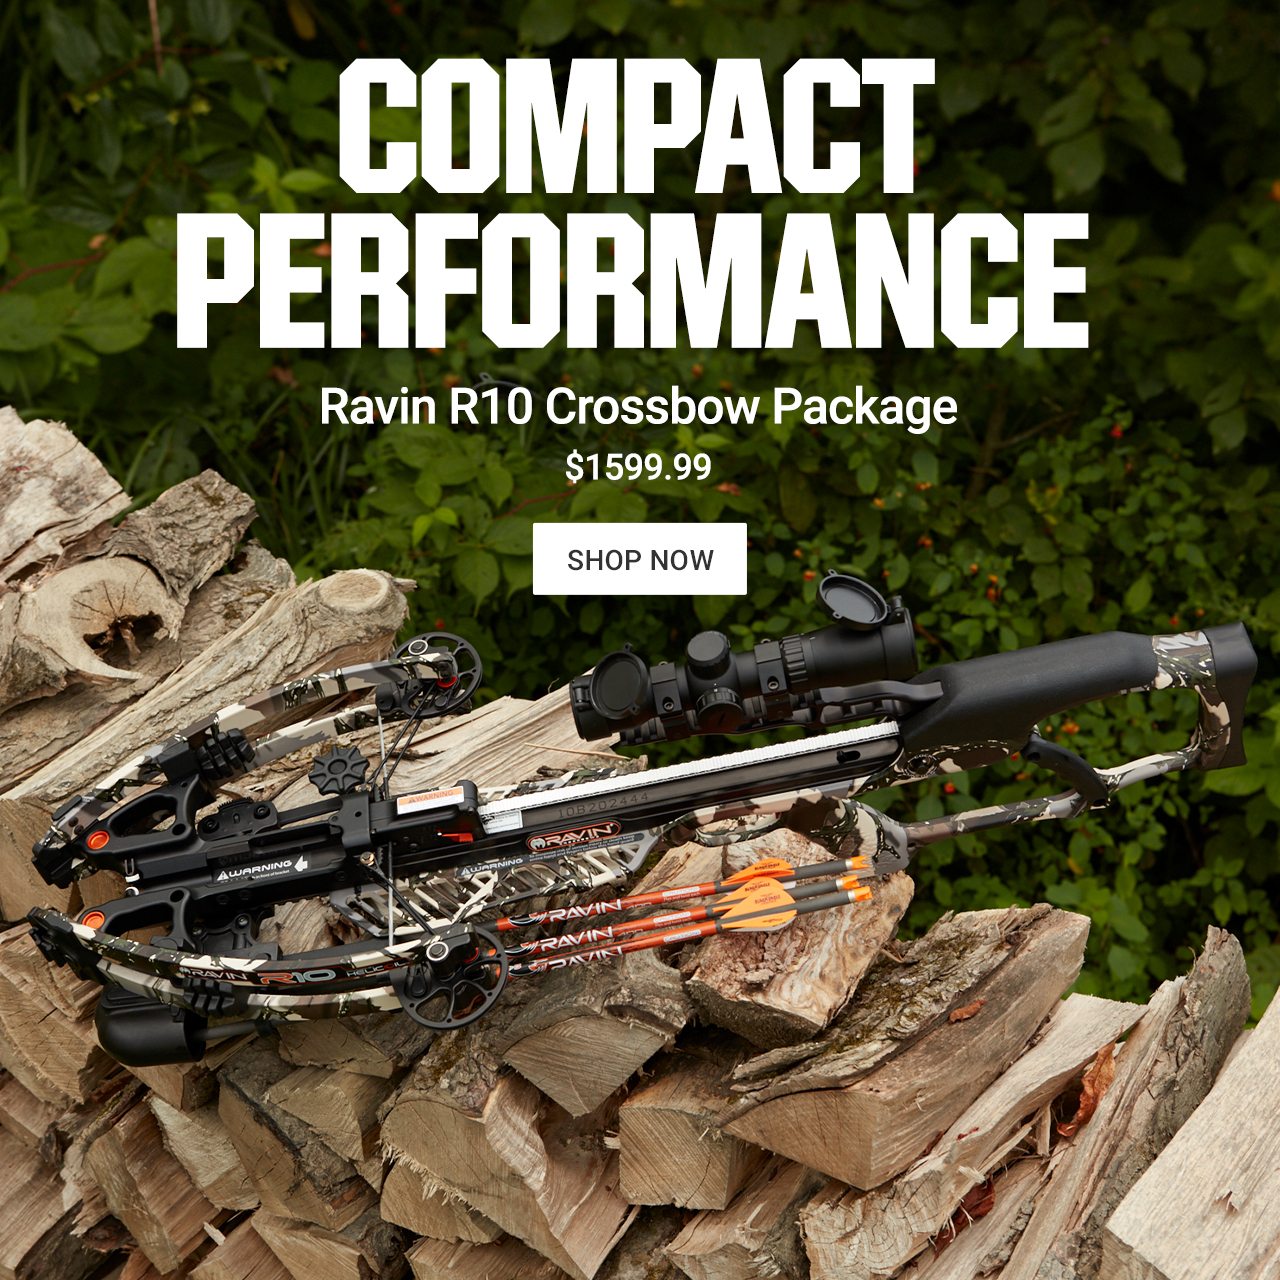 Compact performance. Ravin R10 Crossbow. $1599.99. Shop now.